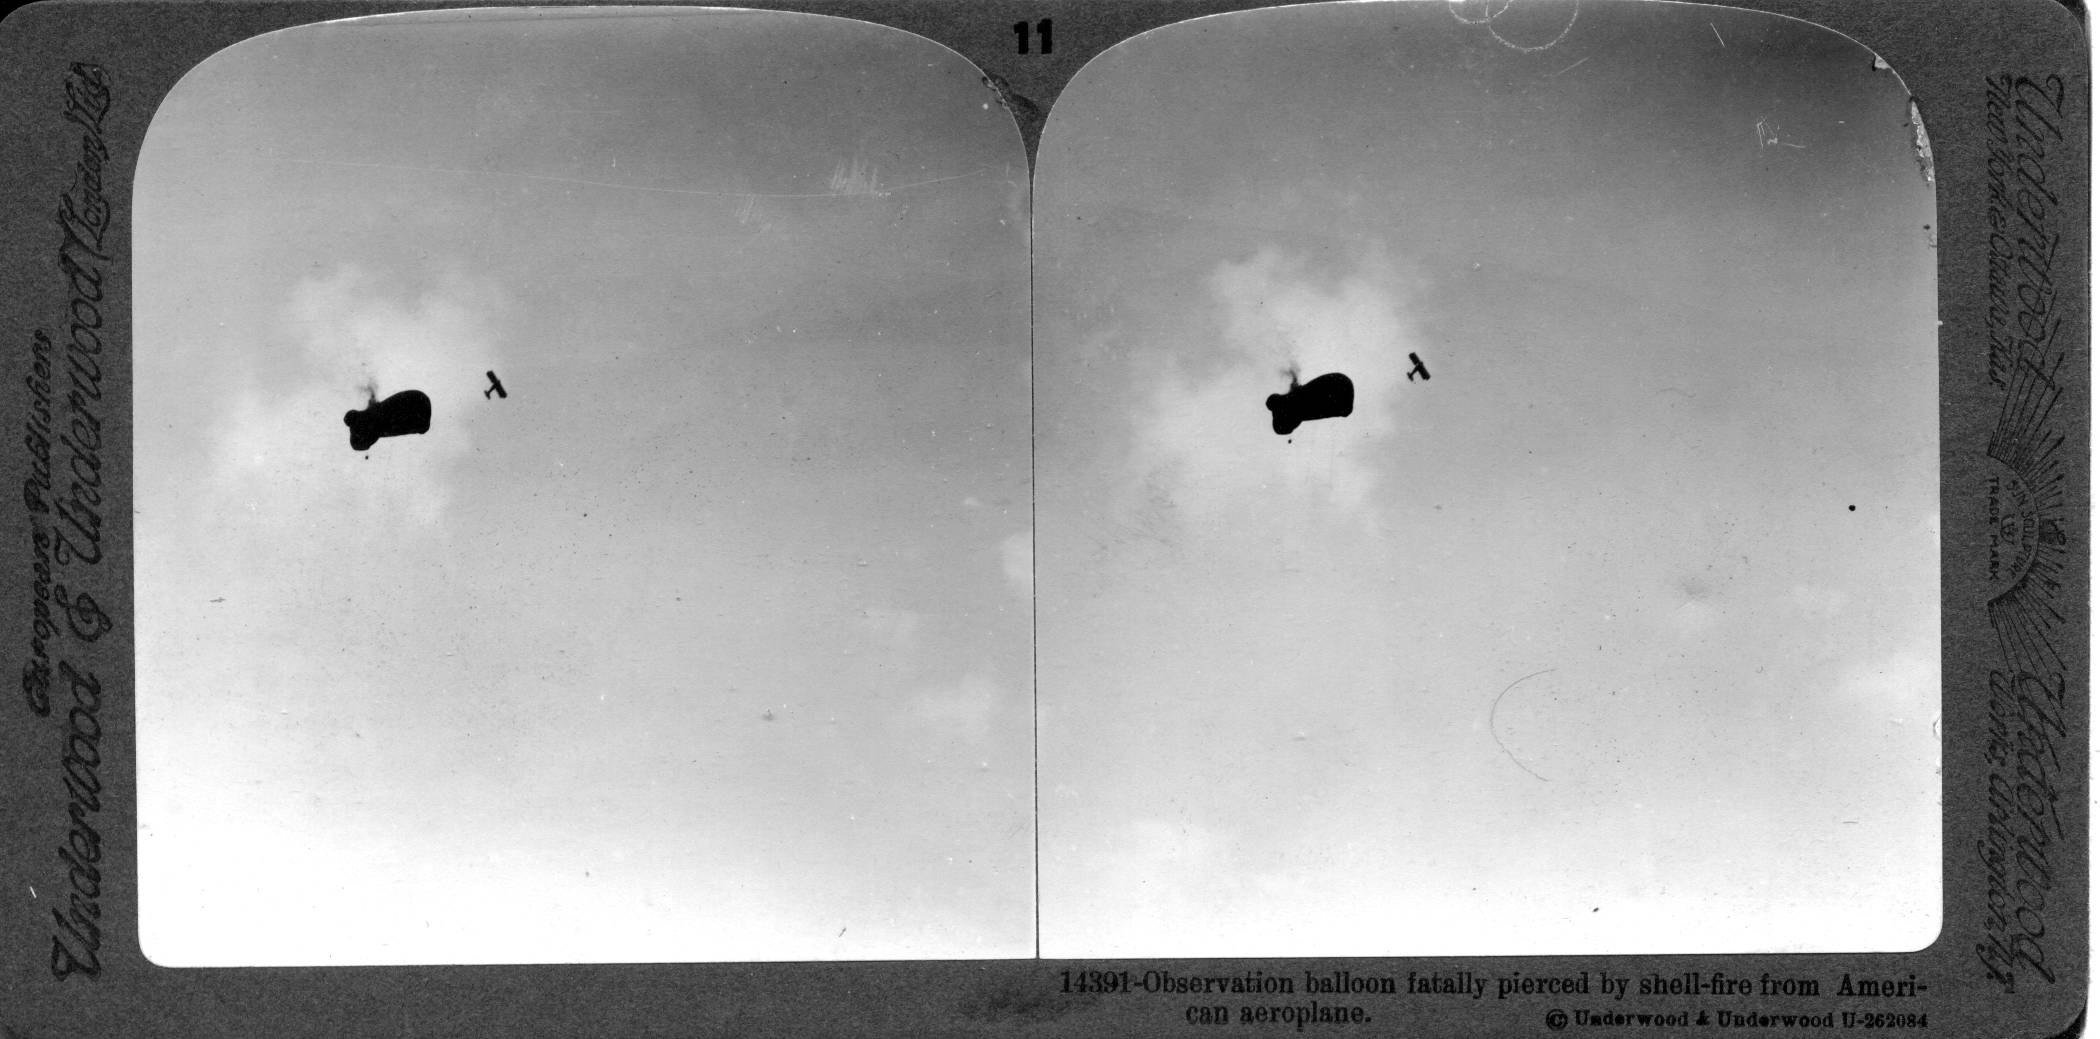 Observation balloon fatally pierced by shell fire from American aeroplane